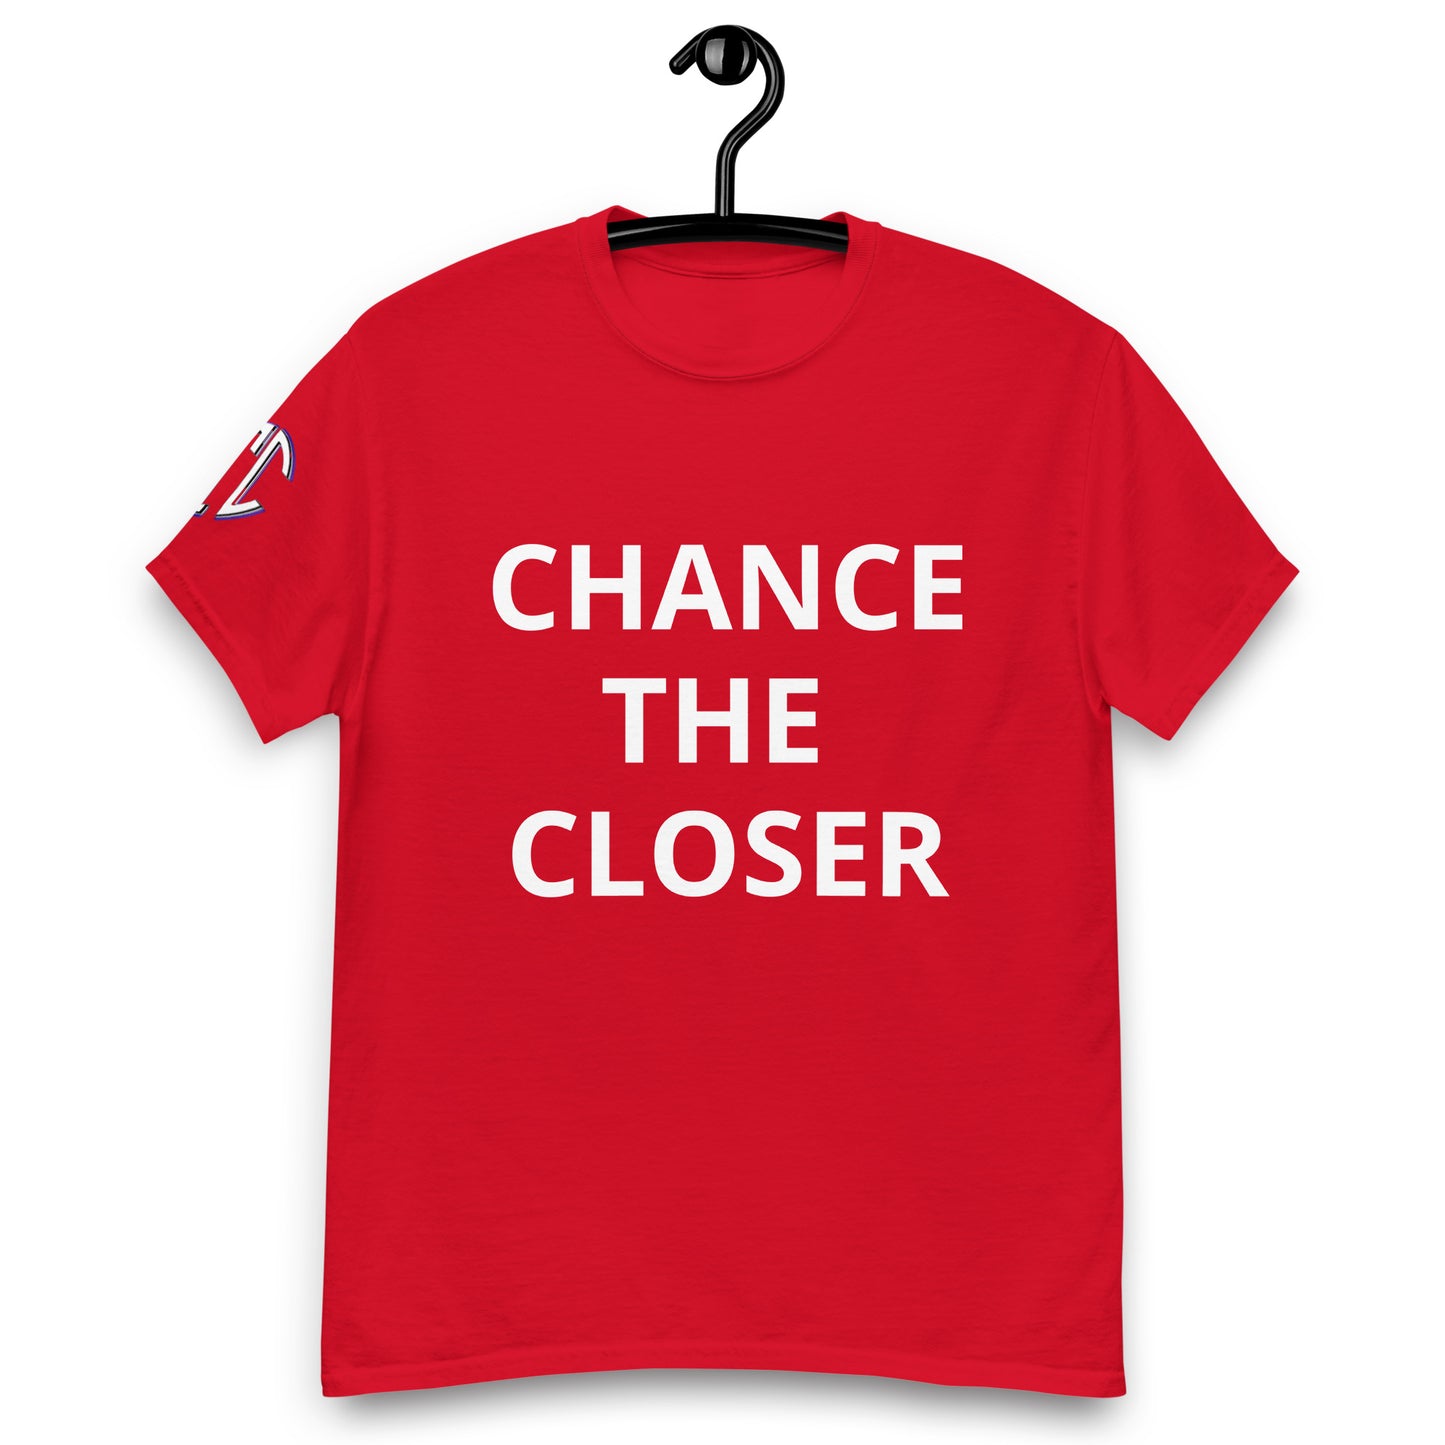 Chance the Closer classic tee